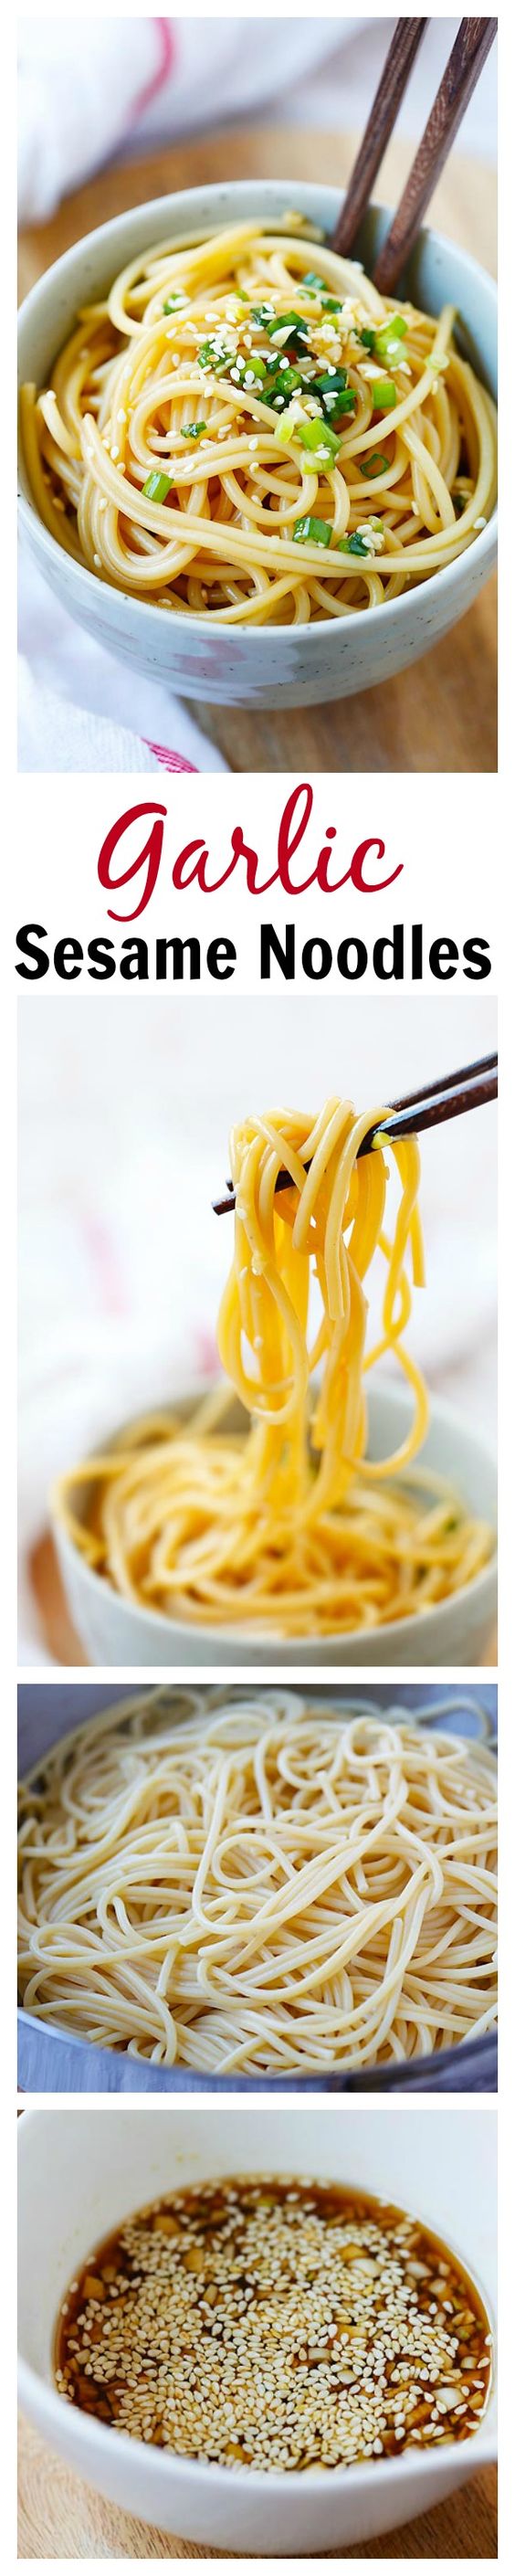 Garlic Sesame Noodles – Asian-flavored spaghetti with soy sauce, garlic and sesame. Easy and delicious recipe that takes 15 mins to make | rasamalaysia.com